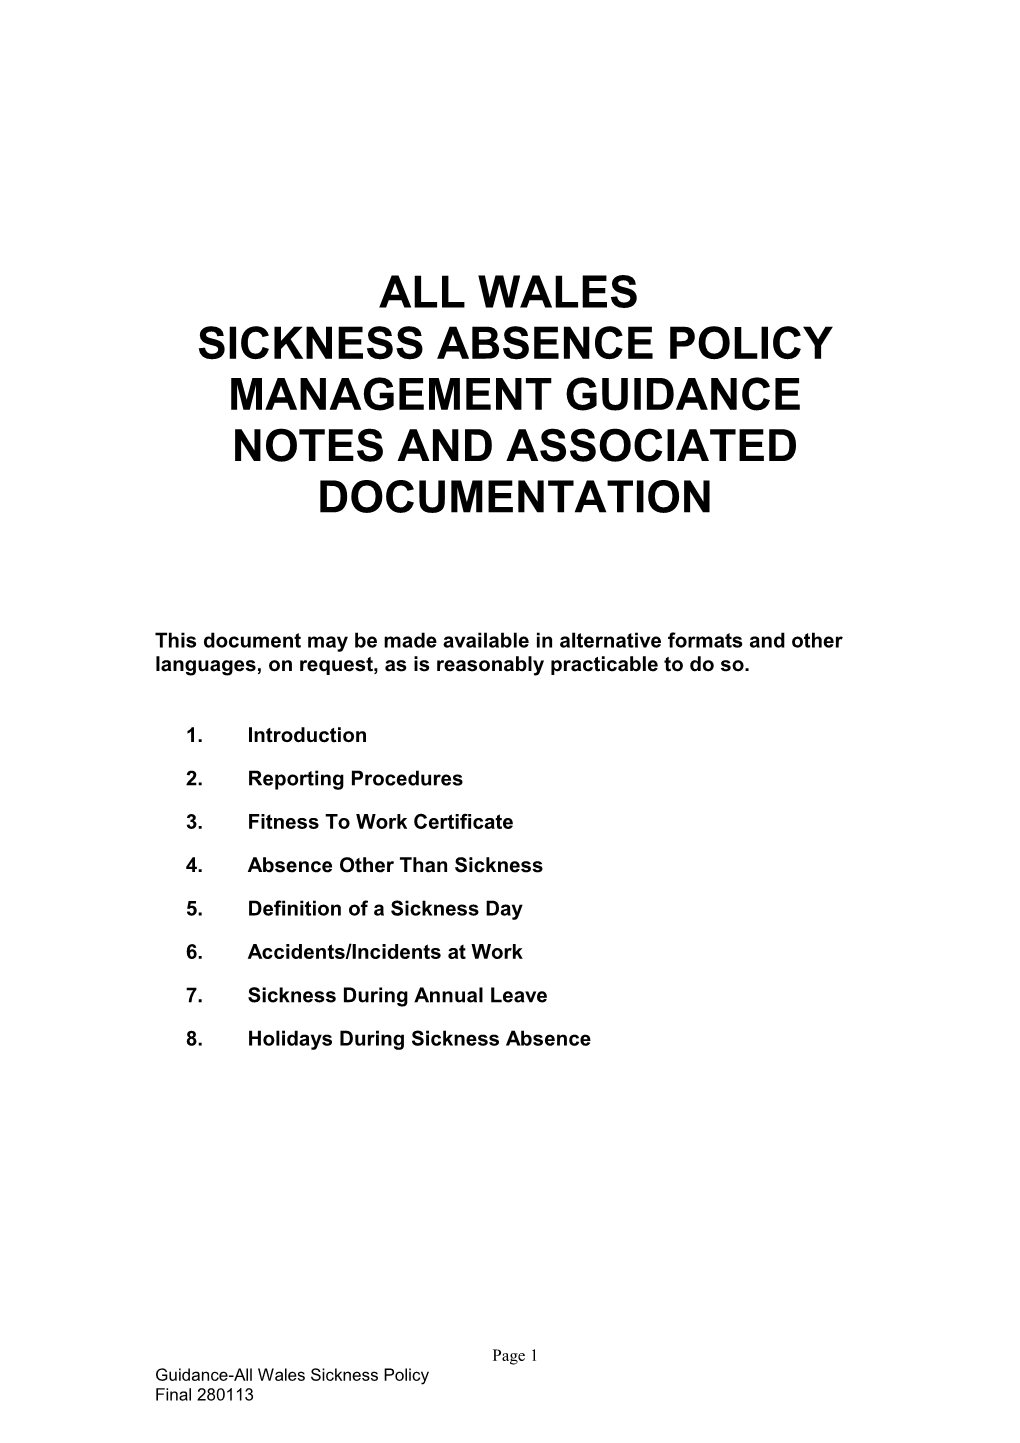 Management Guidance Notes